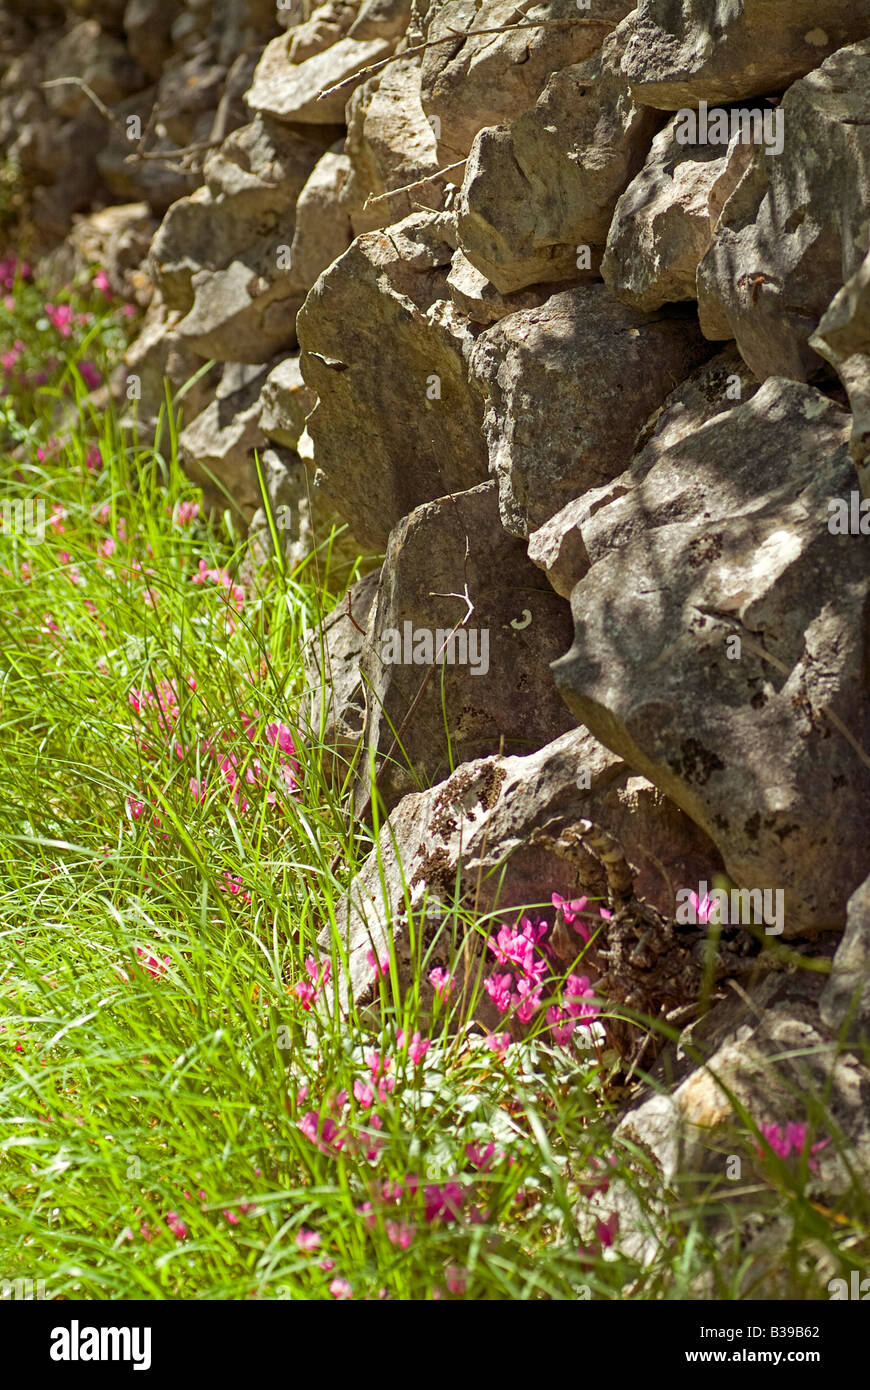 flower Alpenveilchen Cyclamen purpurescens at a stony way in springtime in the nature standing under nature conservancy Croatia Stock Photo